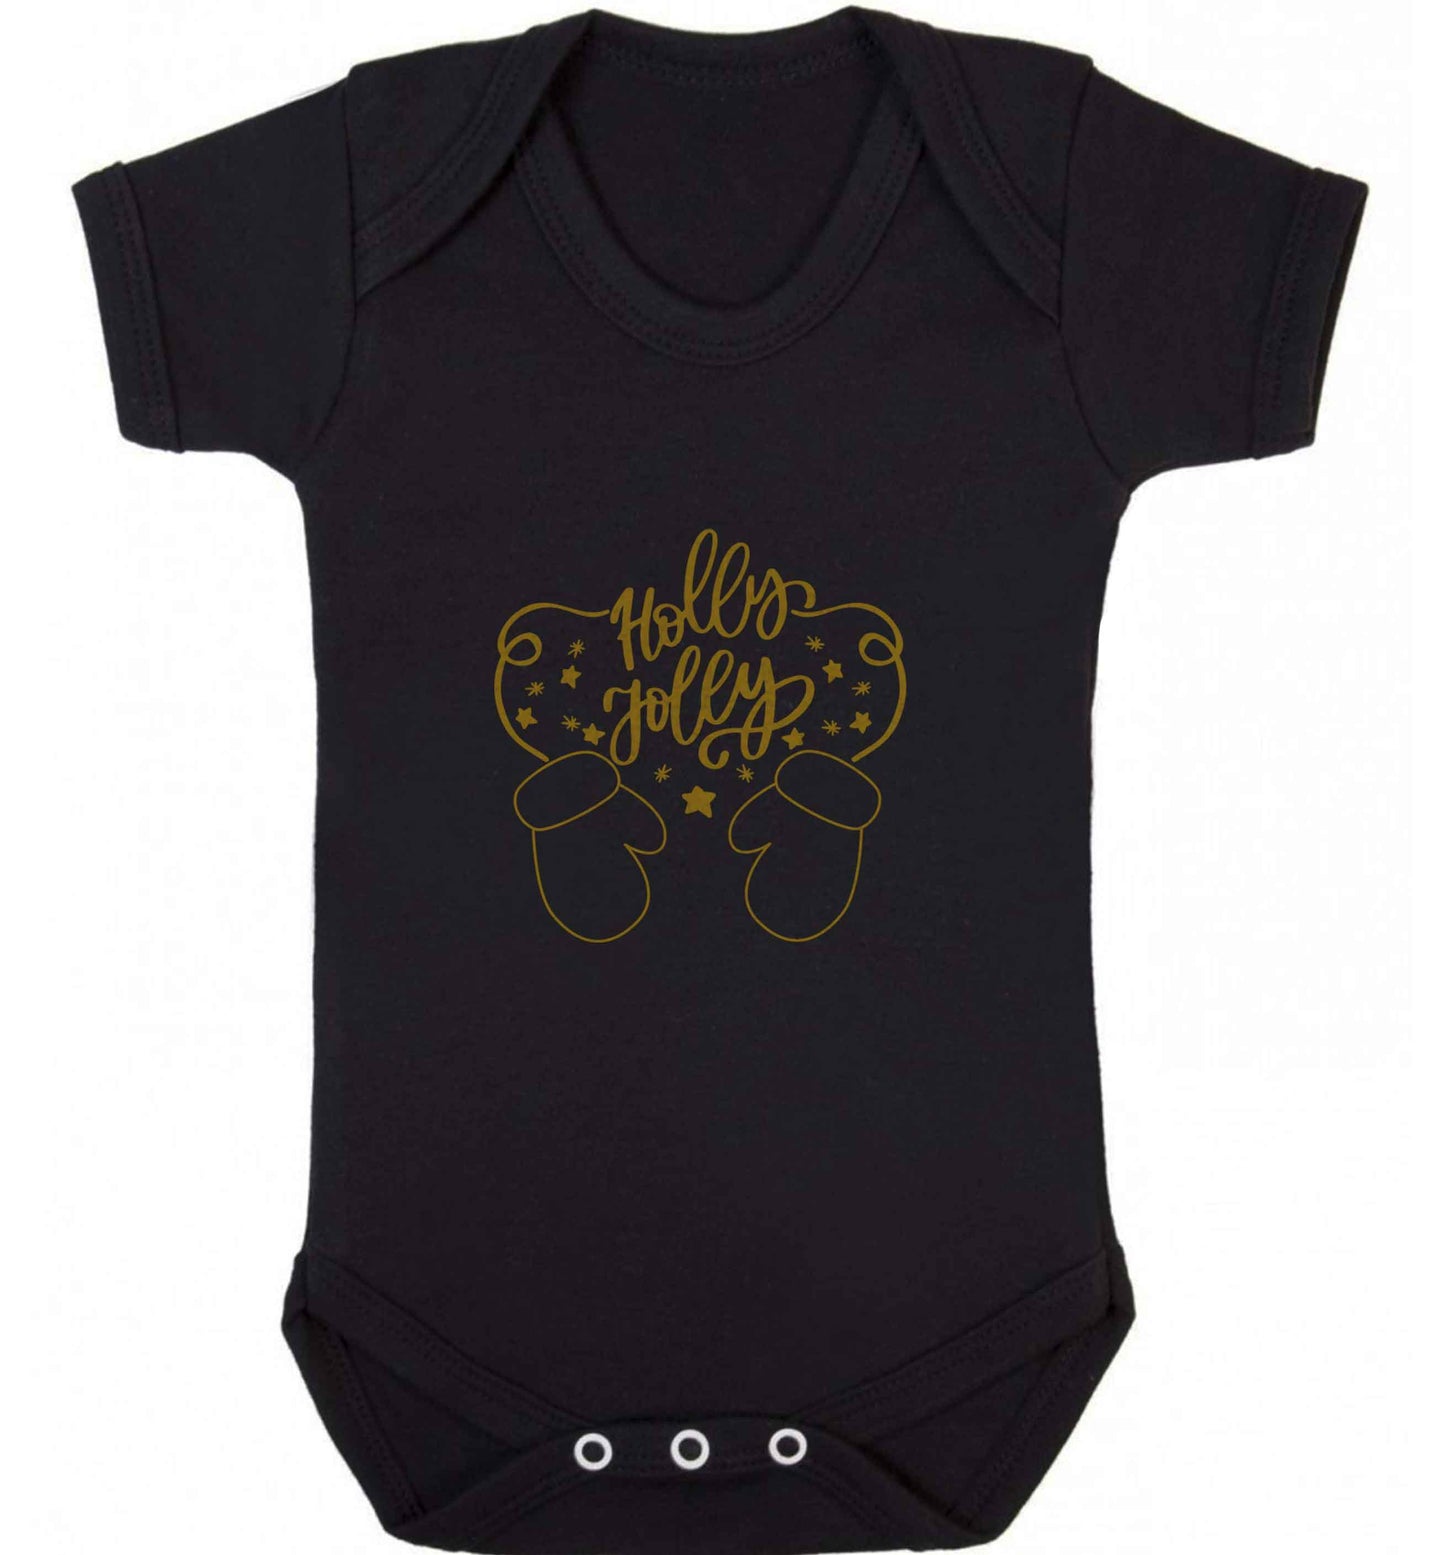 Holly jolly baby vest black 18-24 months